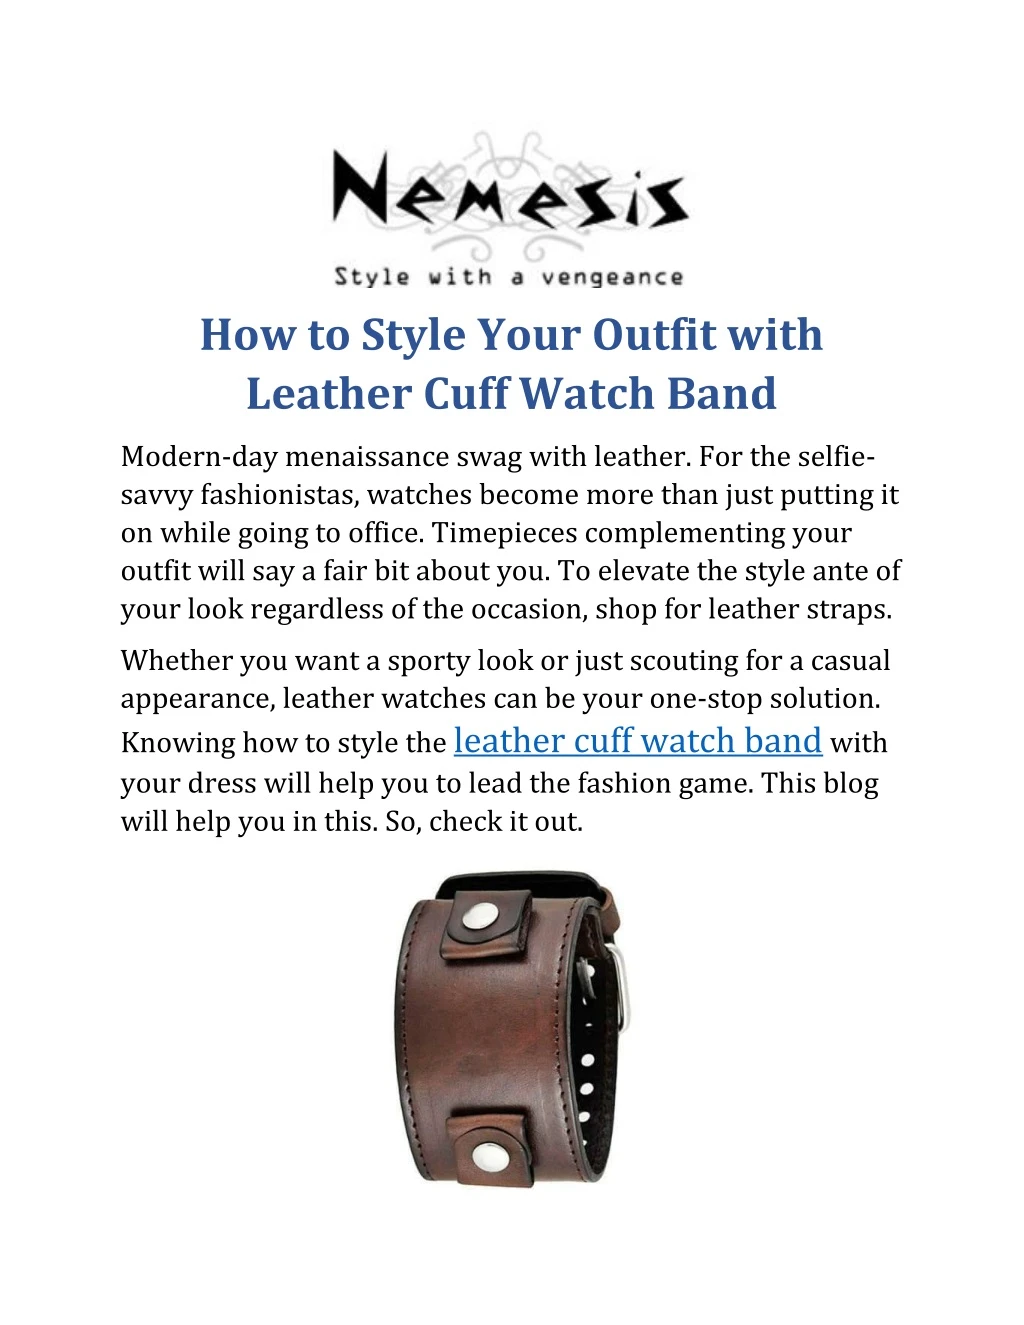 how to style your outfit with leather cuff watch